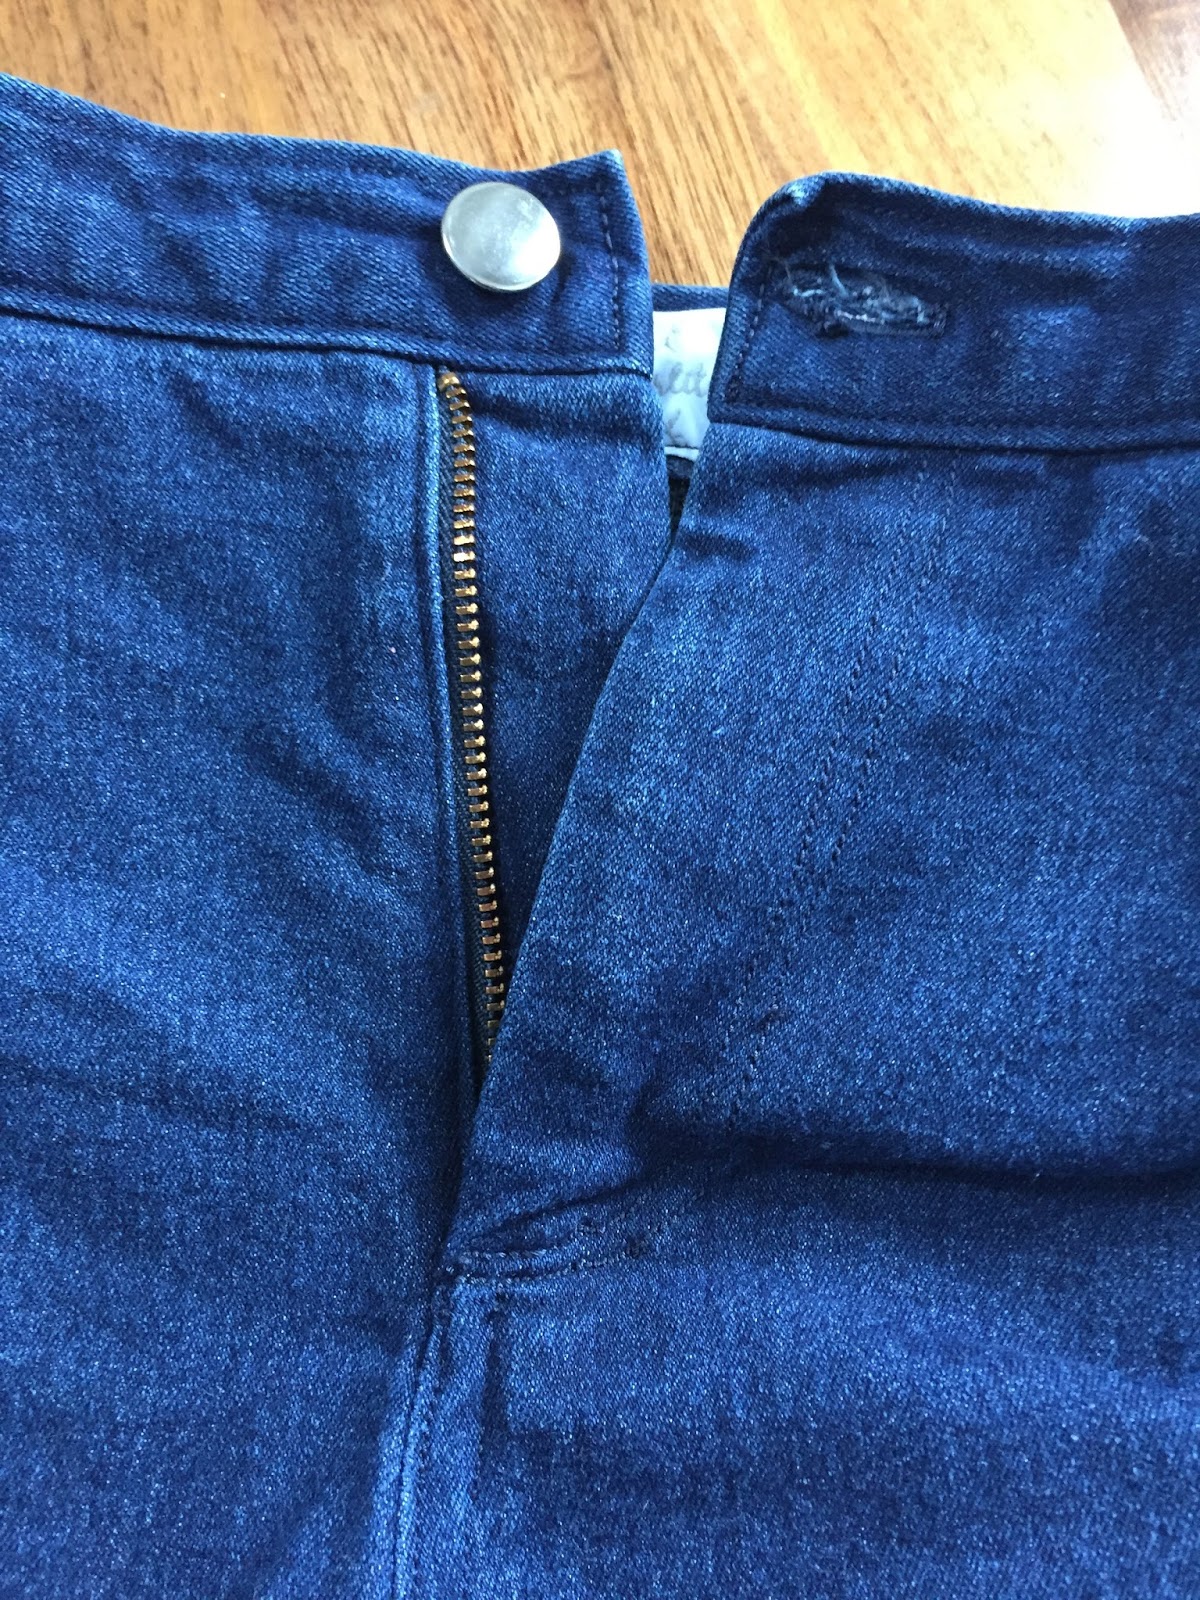 Diary of a Chain Stitcher : Pattern Testing: Mia Jeans from Sew Over It